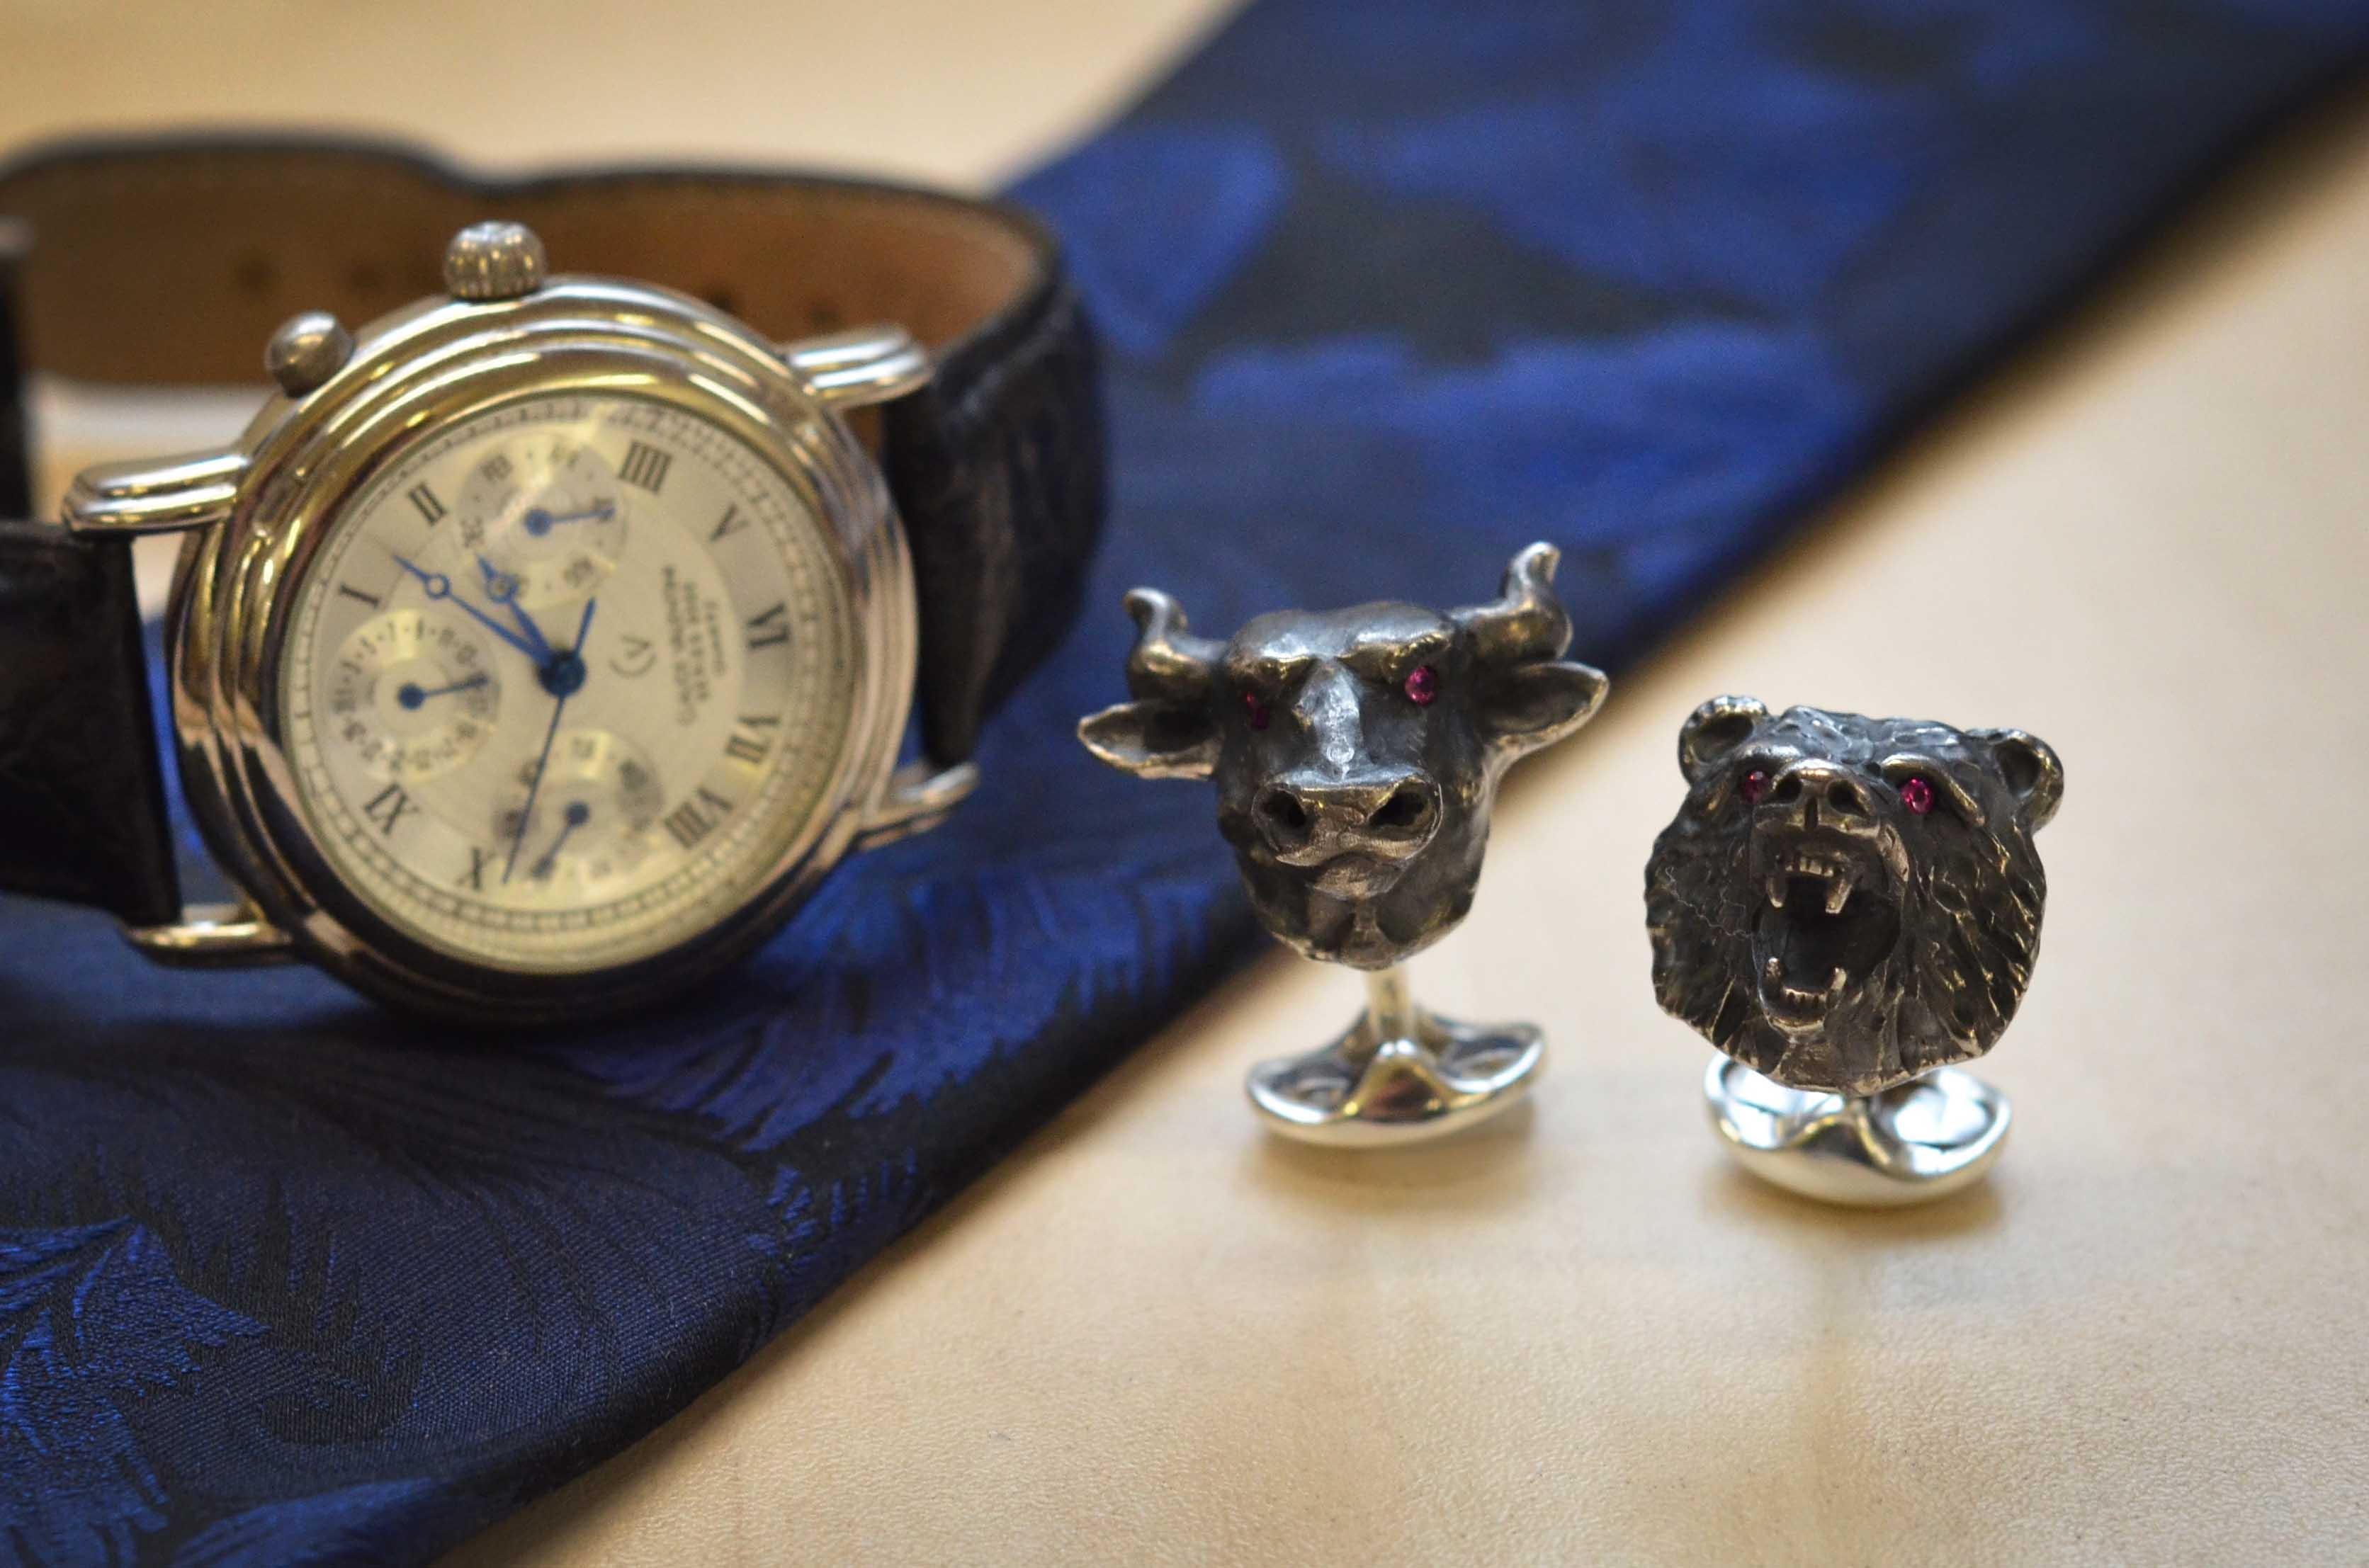 DEAKIN & FRANCIS, PICCADILLY ARCADE, LONDON.

These symbolic beasts of finance worn on the cuff will show that you really mean business. The bull symbolises the rise in the stock market whereas the bear signifies a slow decline. The ruby eyes